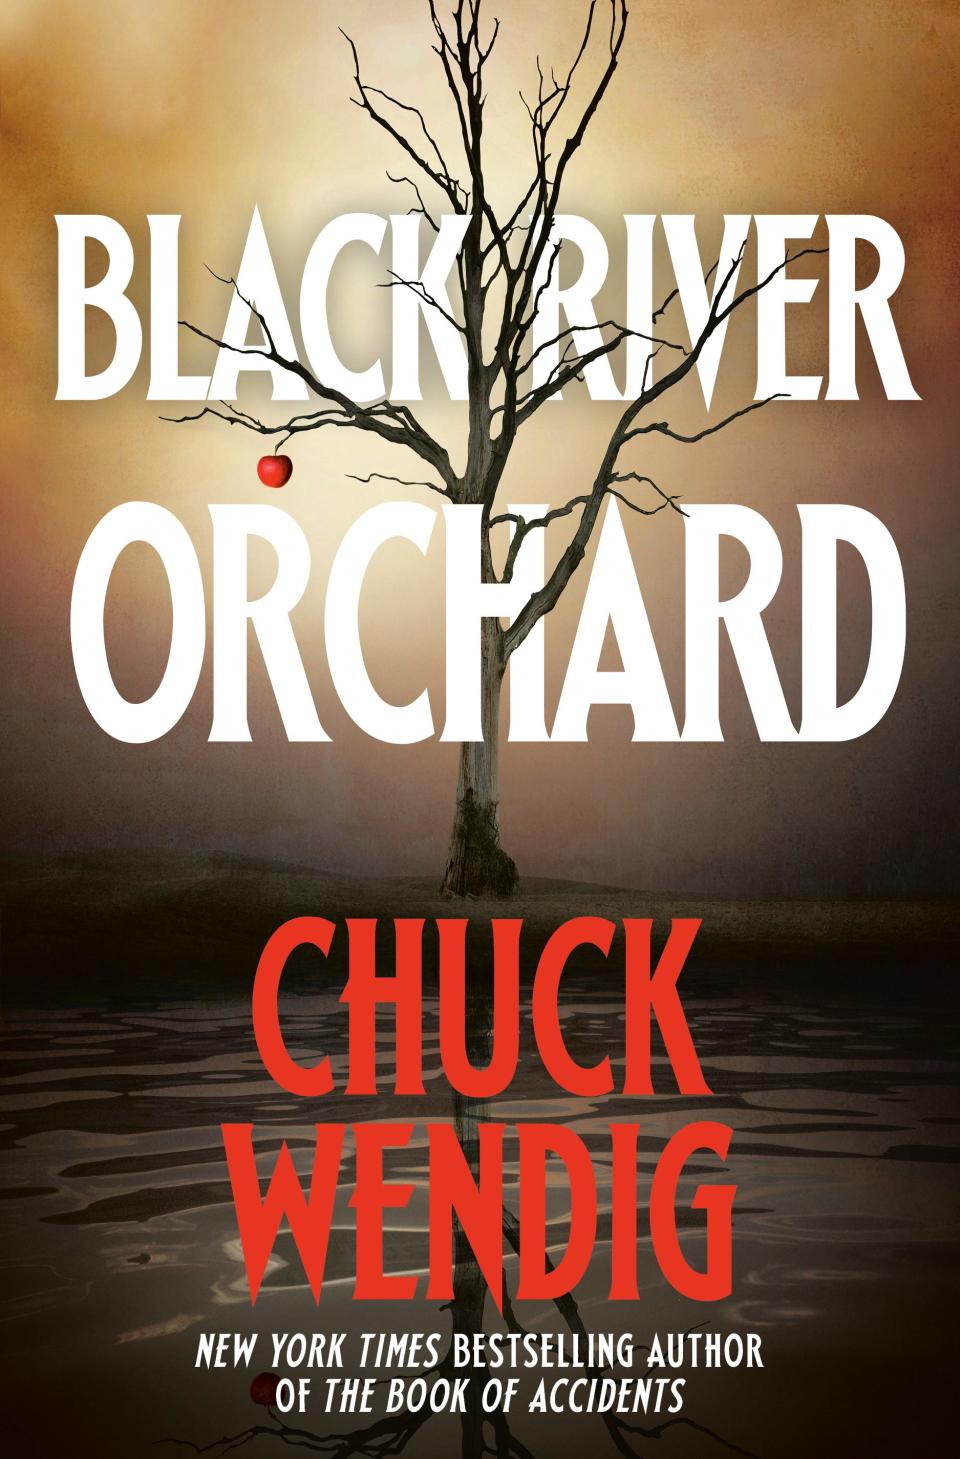 "Black River Orchard," by Chuck Wendig.